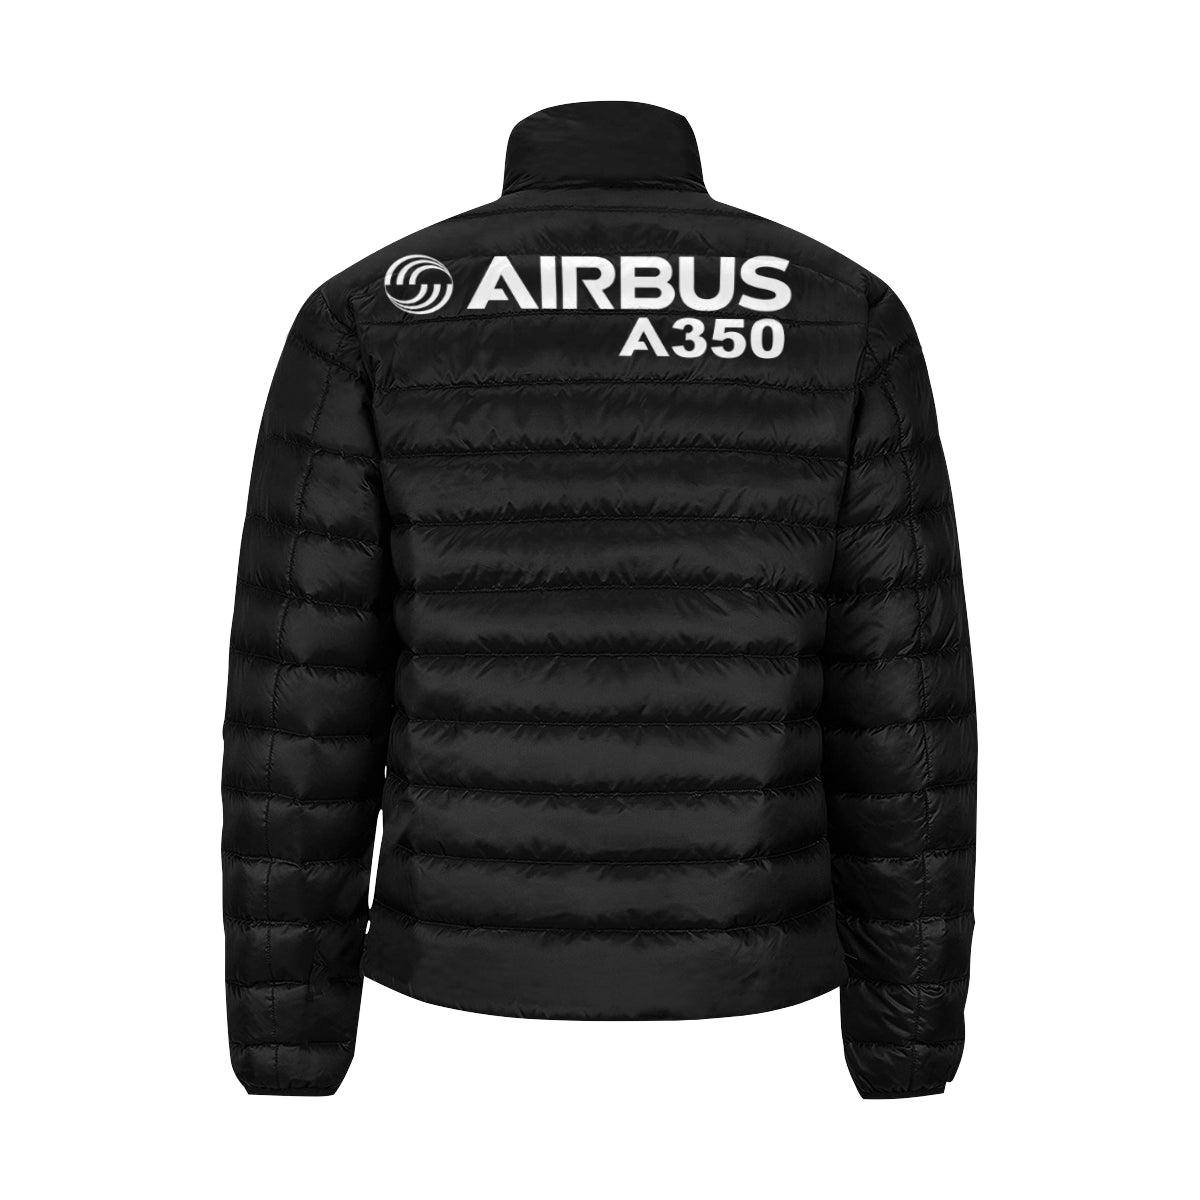 Airbus A350 Men's Stand Collar Padded Jacket e-joyer